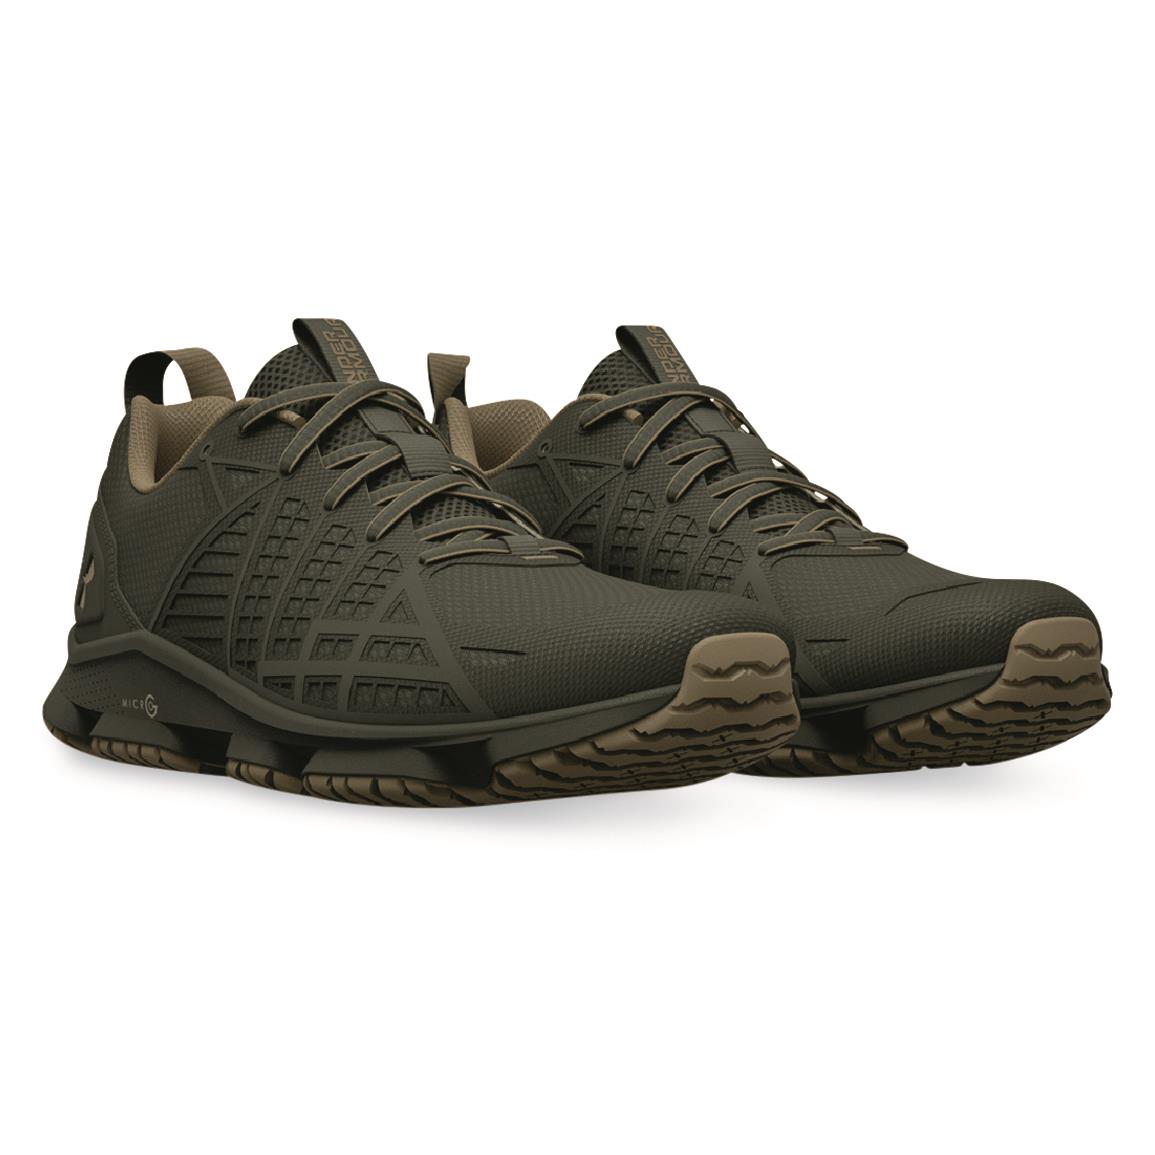 Under Armour Men's Micro G Strikefast Low Tactical Shoes, Baroque Green